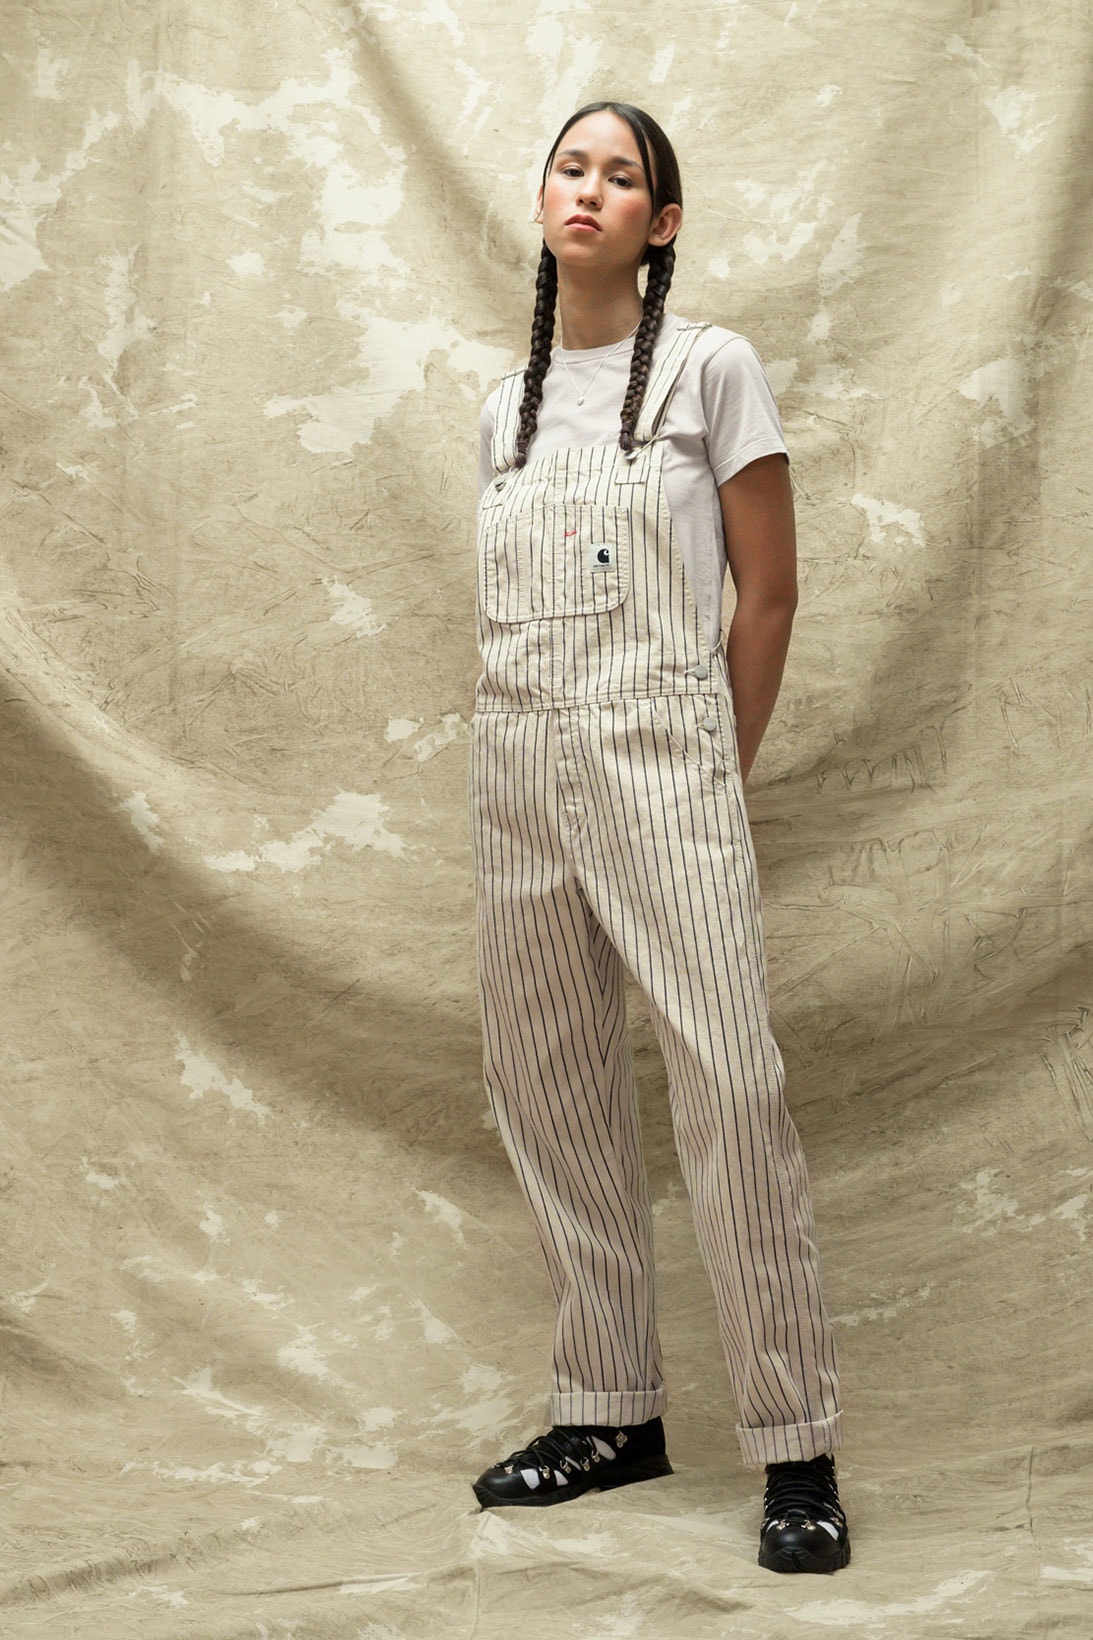 carhartt wip spring summer 2021 ss21 collection lookbook striped overalls t-shirt